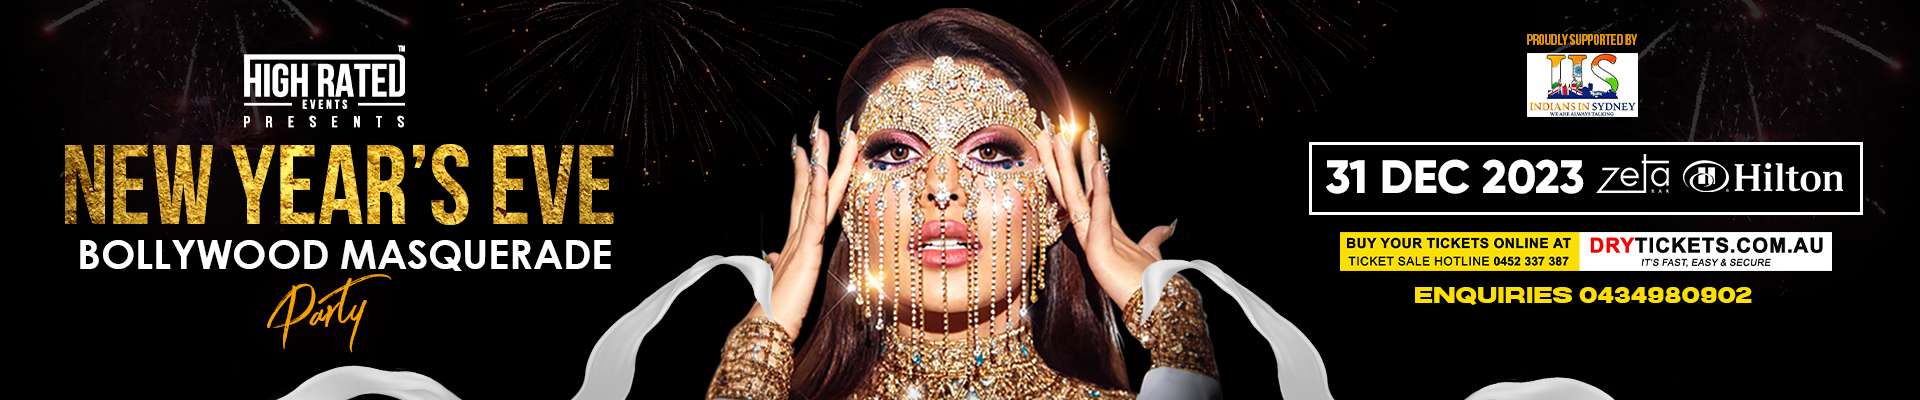 New Year's Eve - Bollywood Masquerade Party In Sydney